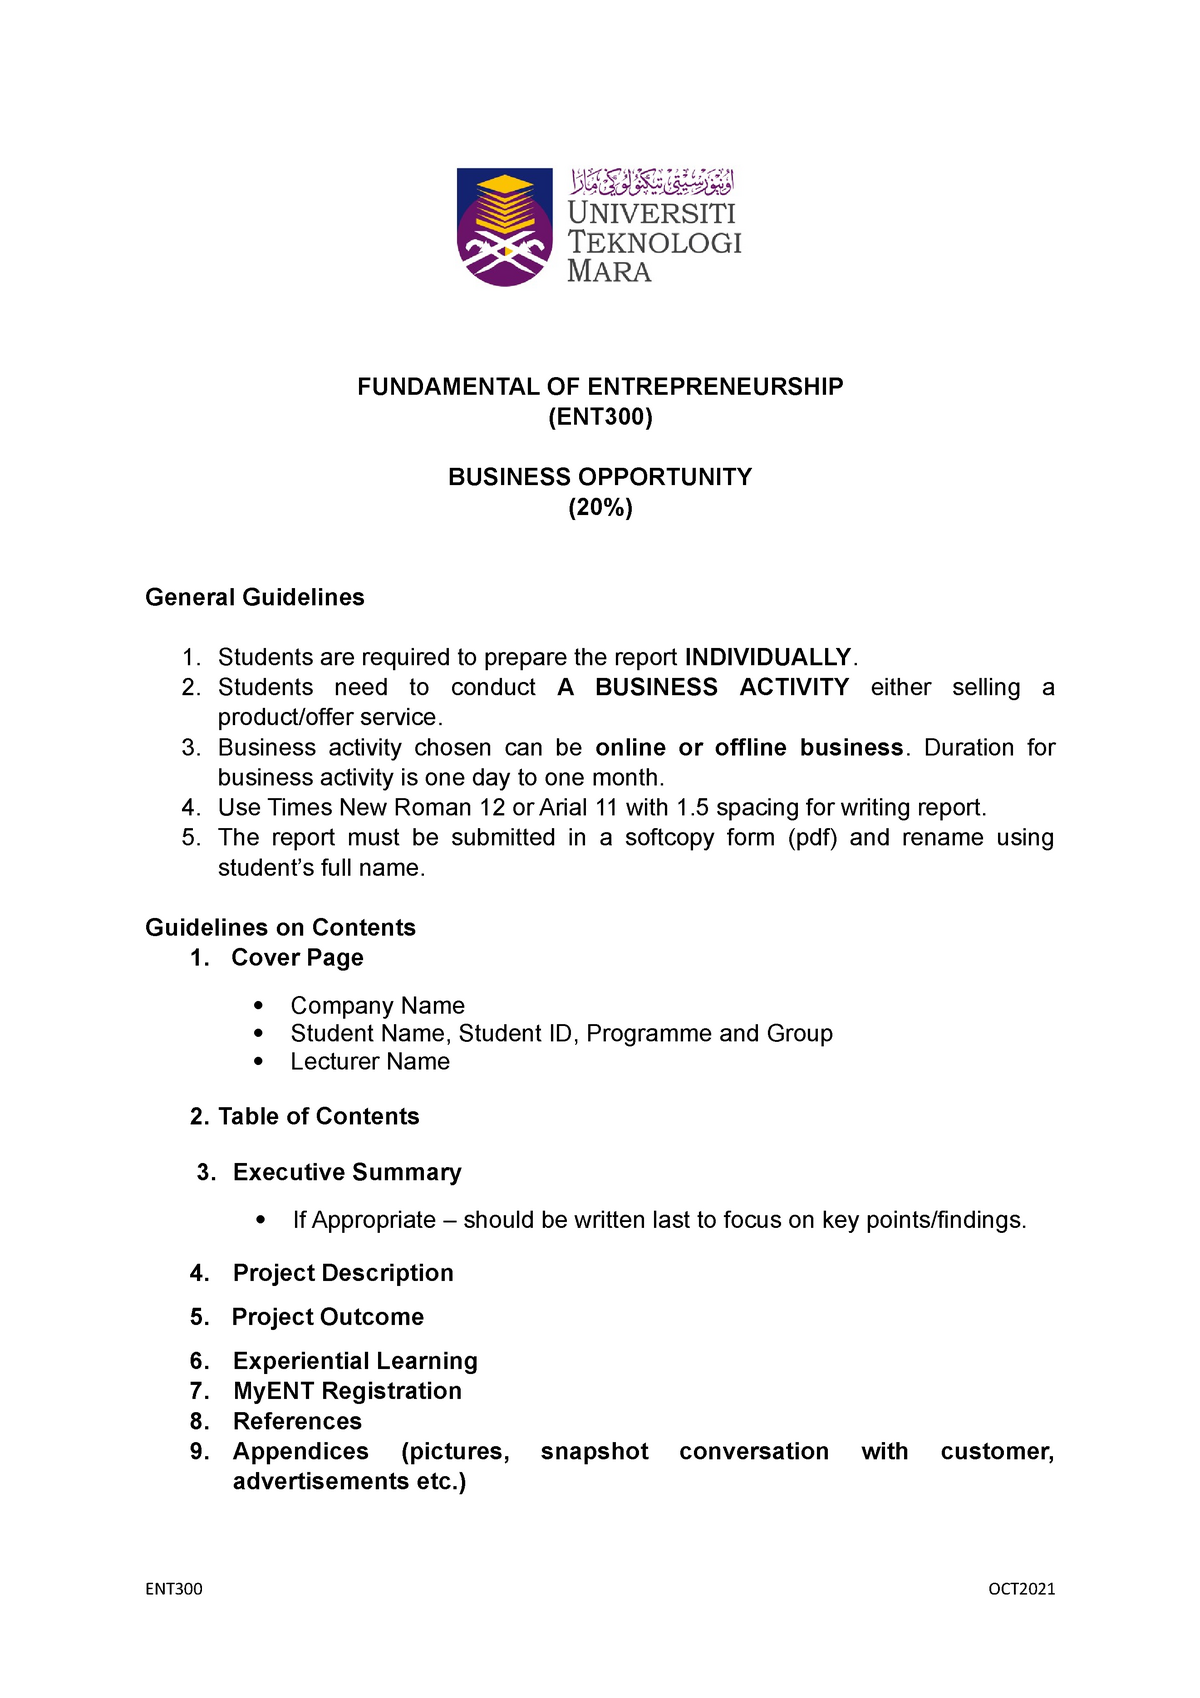 contoh assignment ent300 business opportunity